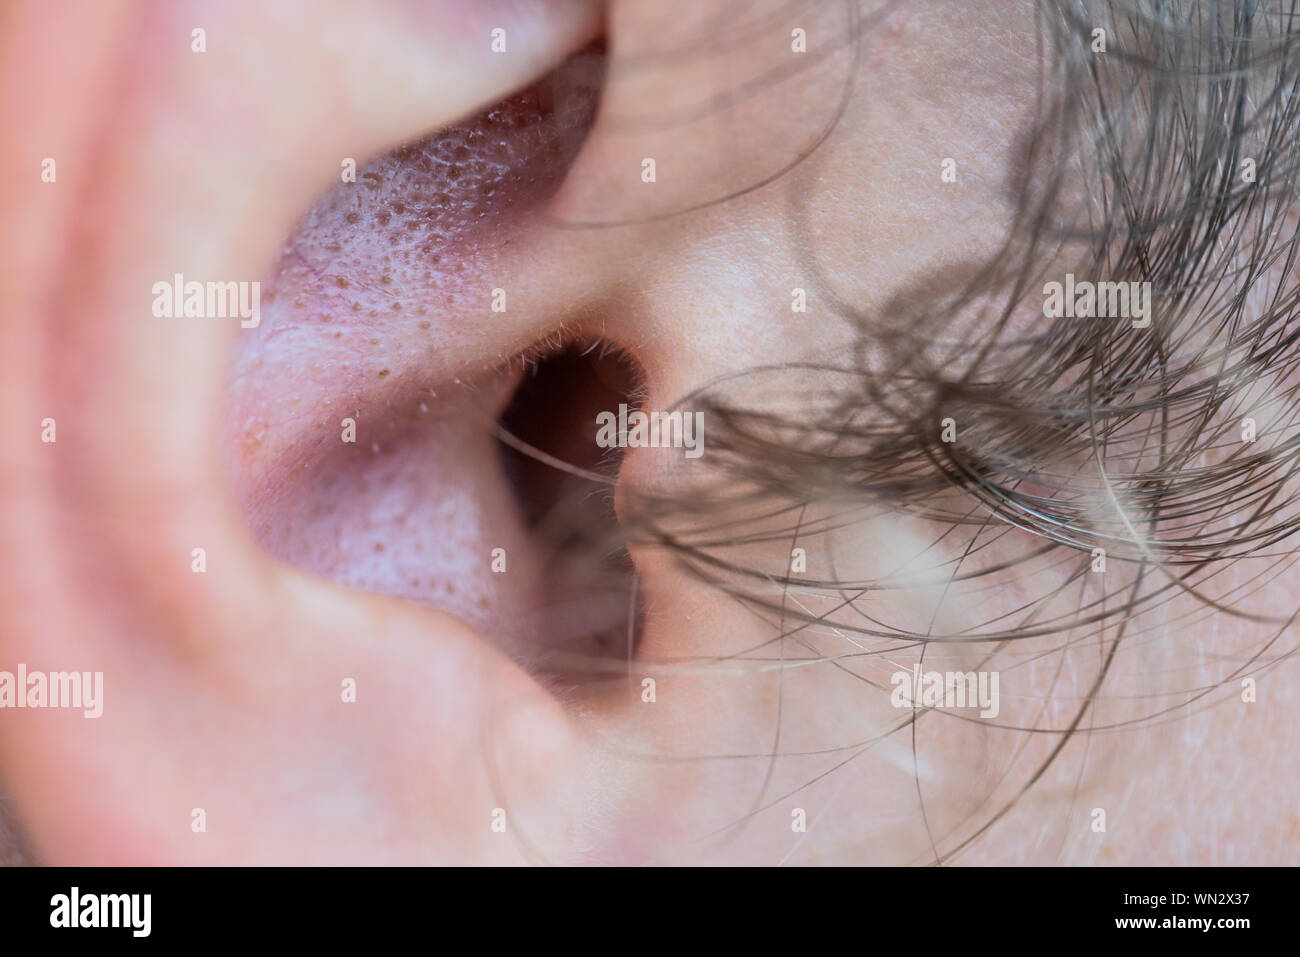 Pores in the ear Stock Photo